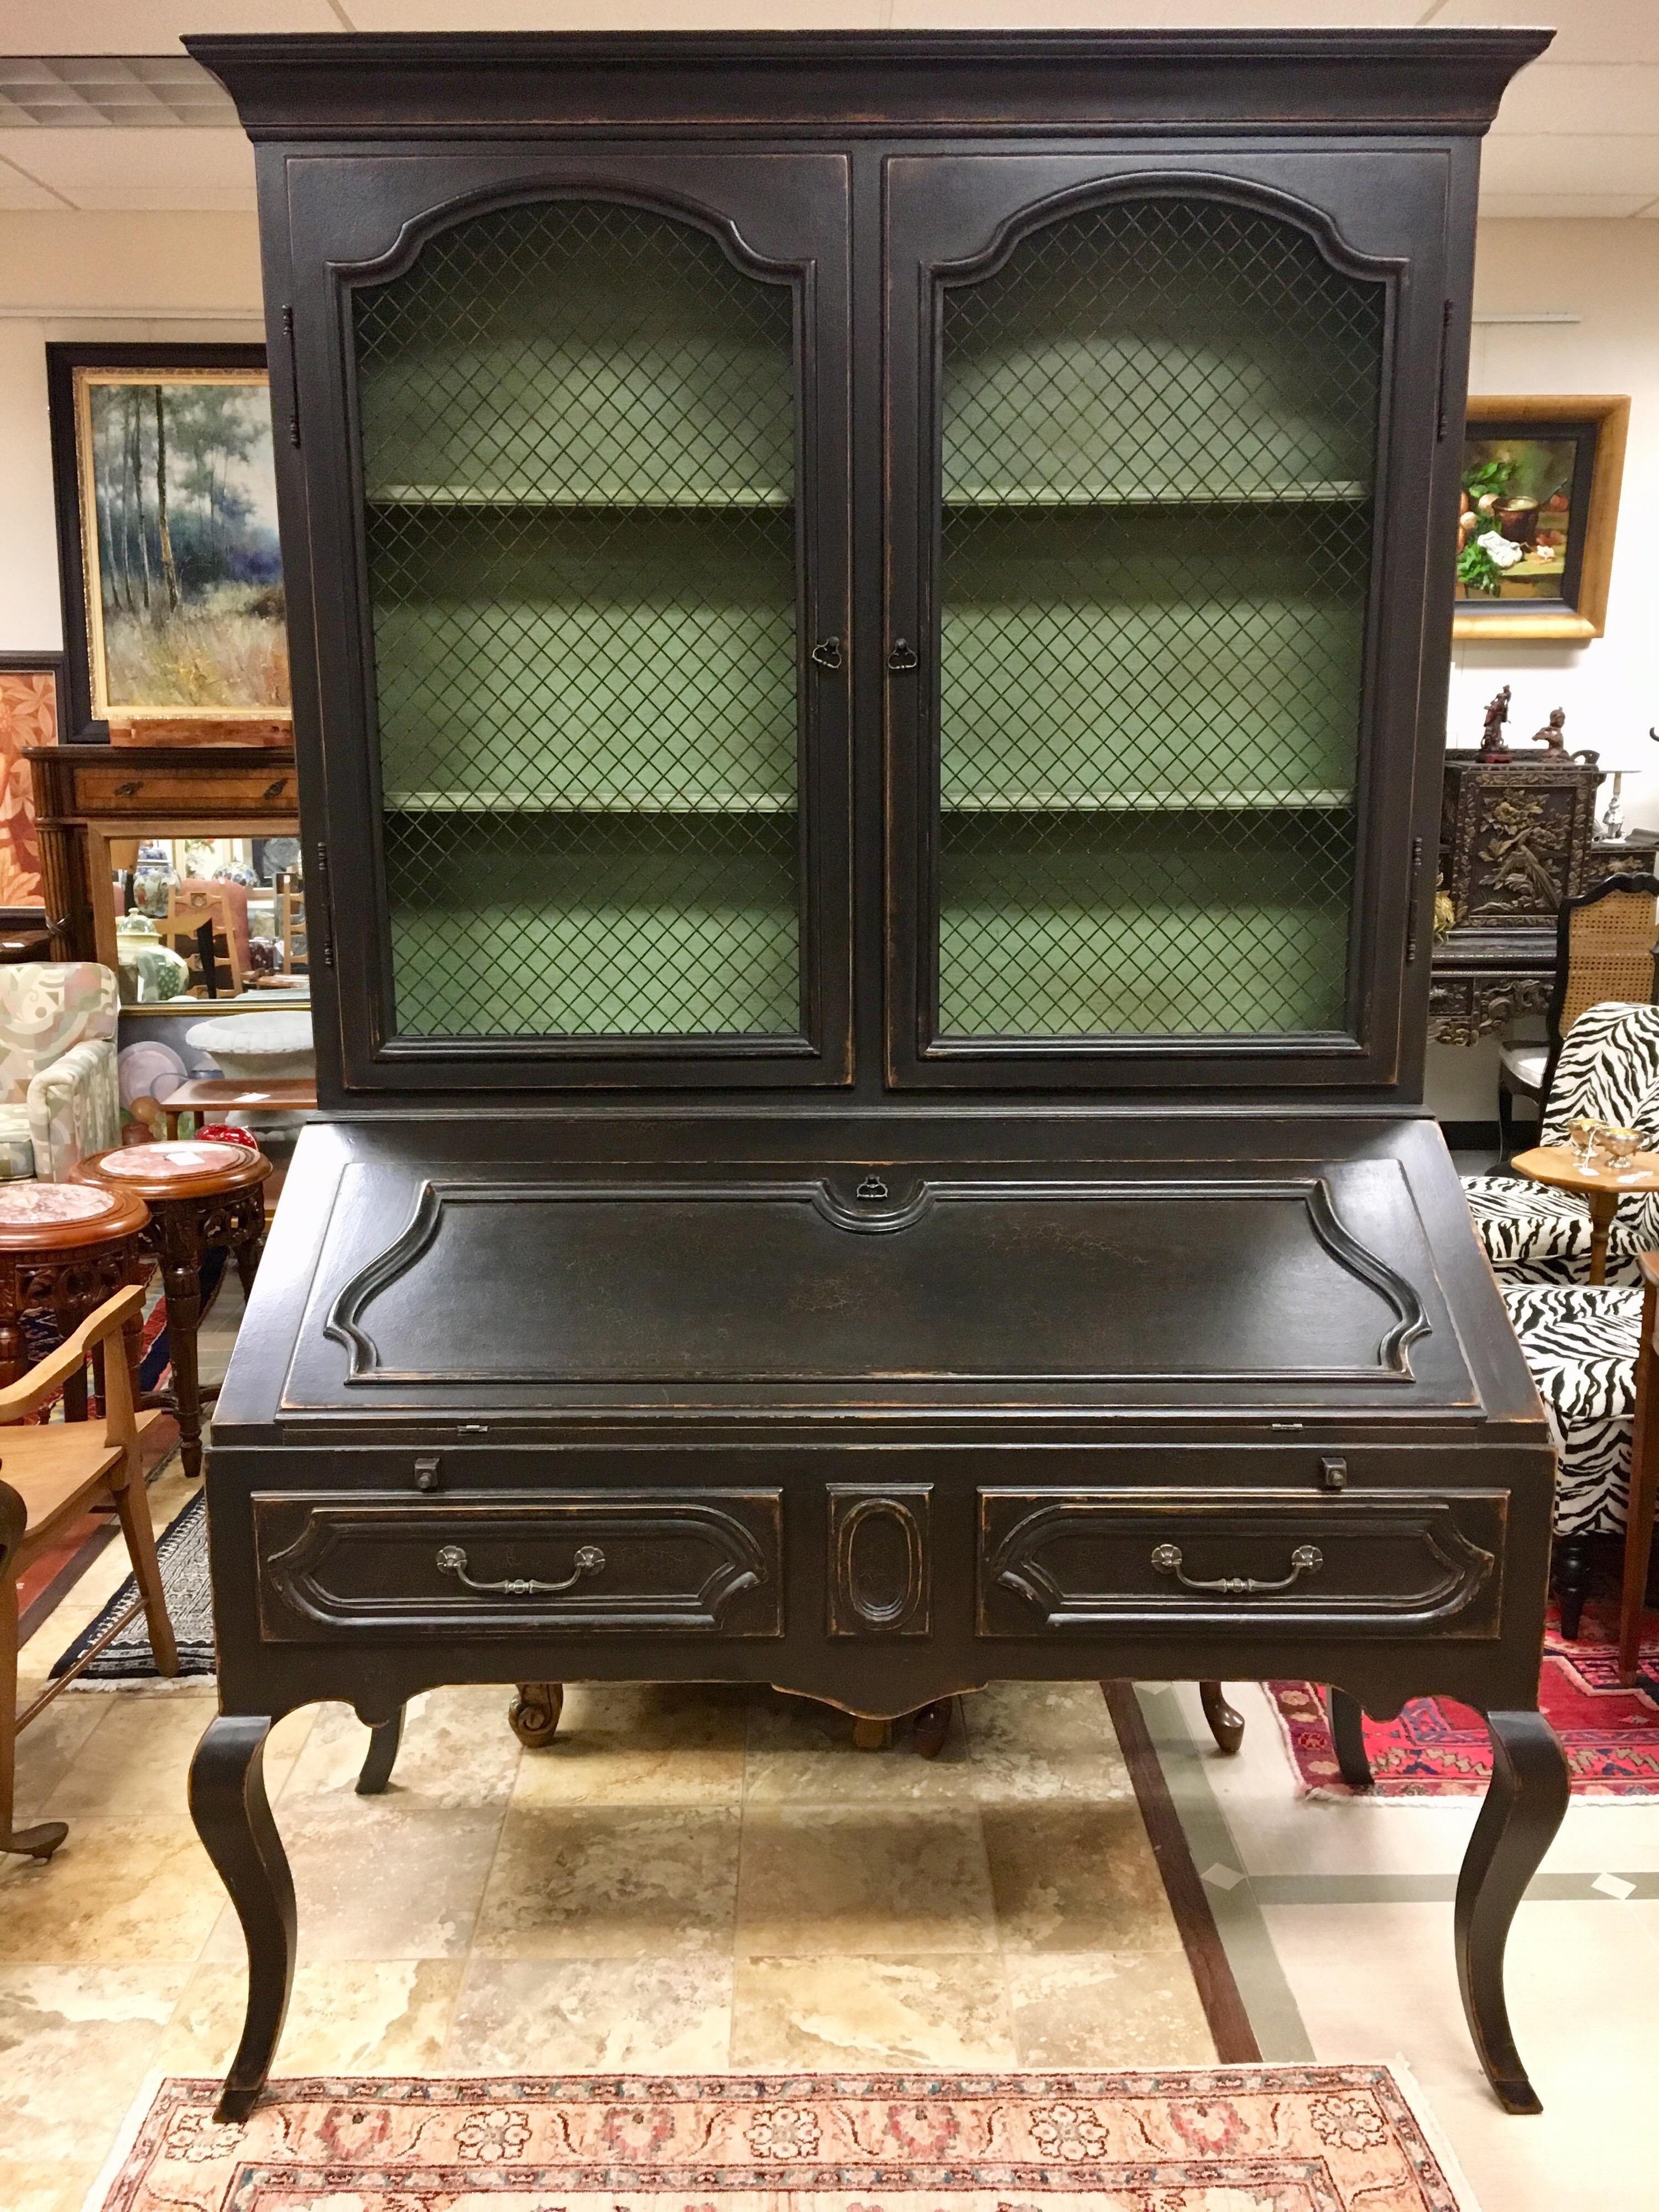 Stunning and sought after Minton Spidell Louis XV secretary in a black distressed exterior and a sea foam green interior. Chicken wire doors open to shelves. Comes in two pieces, top and bottom.
Features several drawers inside and outside. An